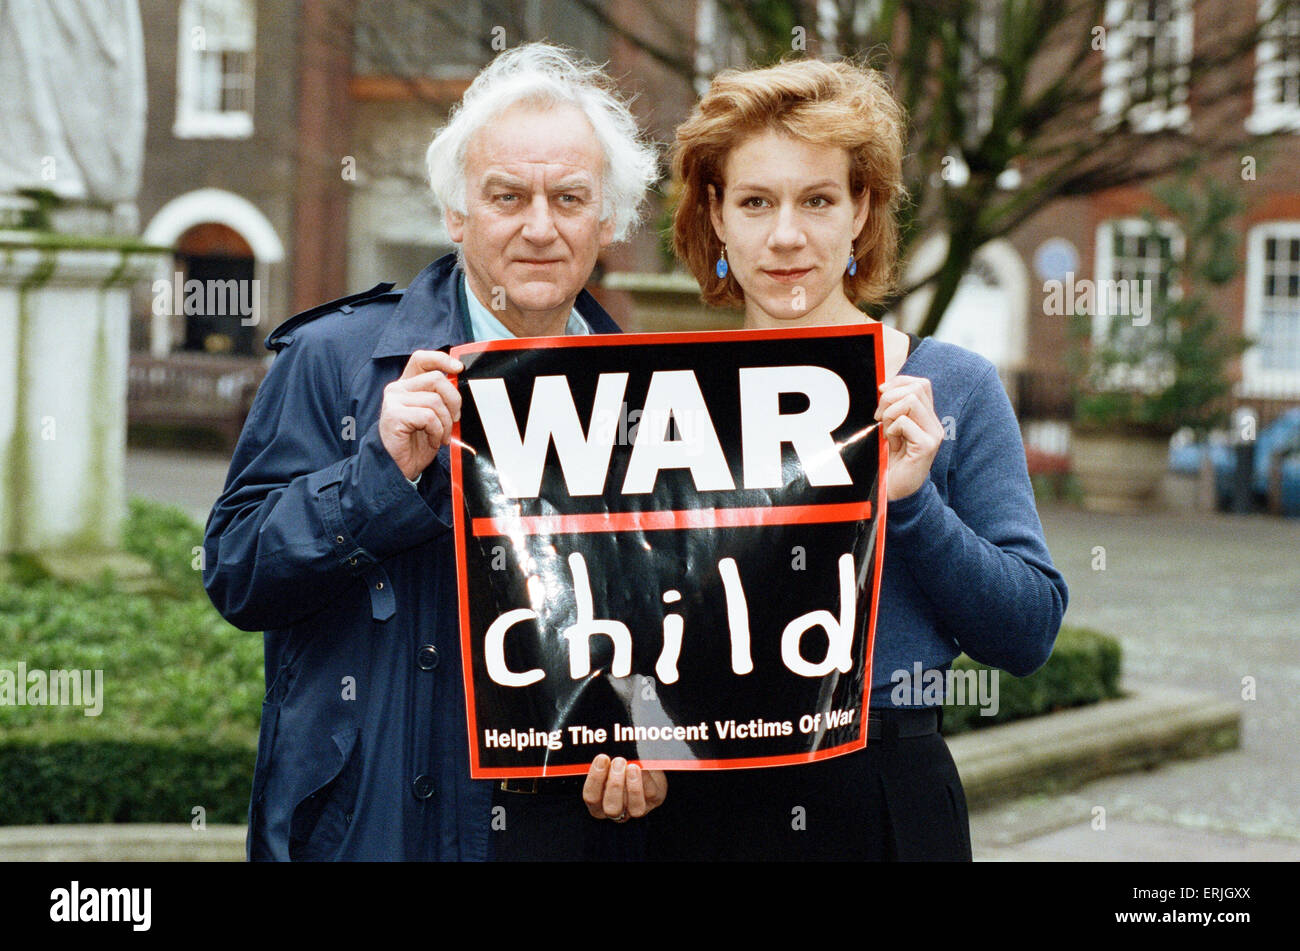 Supporters of the War Child Charity John and Juliet Stevenson. War Child was founded in 1993 by British filmmakers Bill Leeson and David Wilson, when they returned from filming in the war in former Yugoslavia. In 1993 the first War Child convoy with equipment, and food to run a mobile bakery travelled to former Yugoslavia. War Child Netherlands was founded shortly after in 1994 by Willemijn Verloop, when she met Music Therapy professor Nigel Osborne during the war in Bosnia; War Child Holland programmes have since always focussed on psychosocial aid. War Child Canada was founded in 1998 by Sam Stock Photo